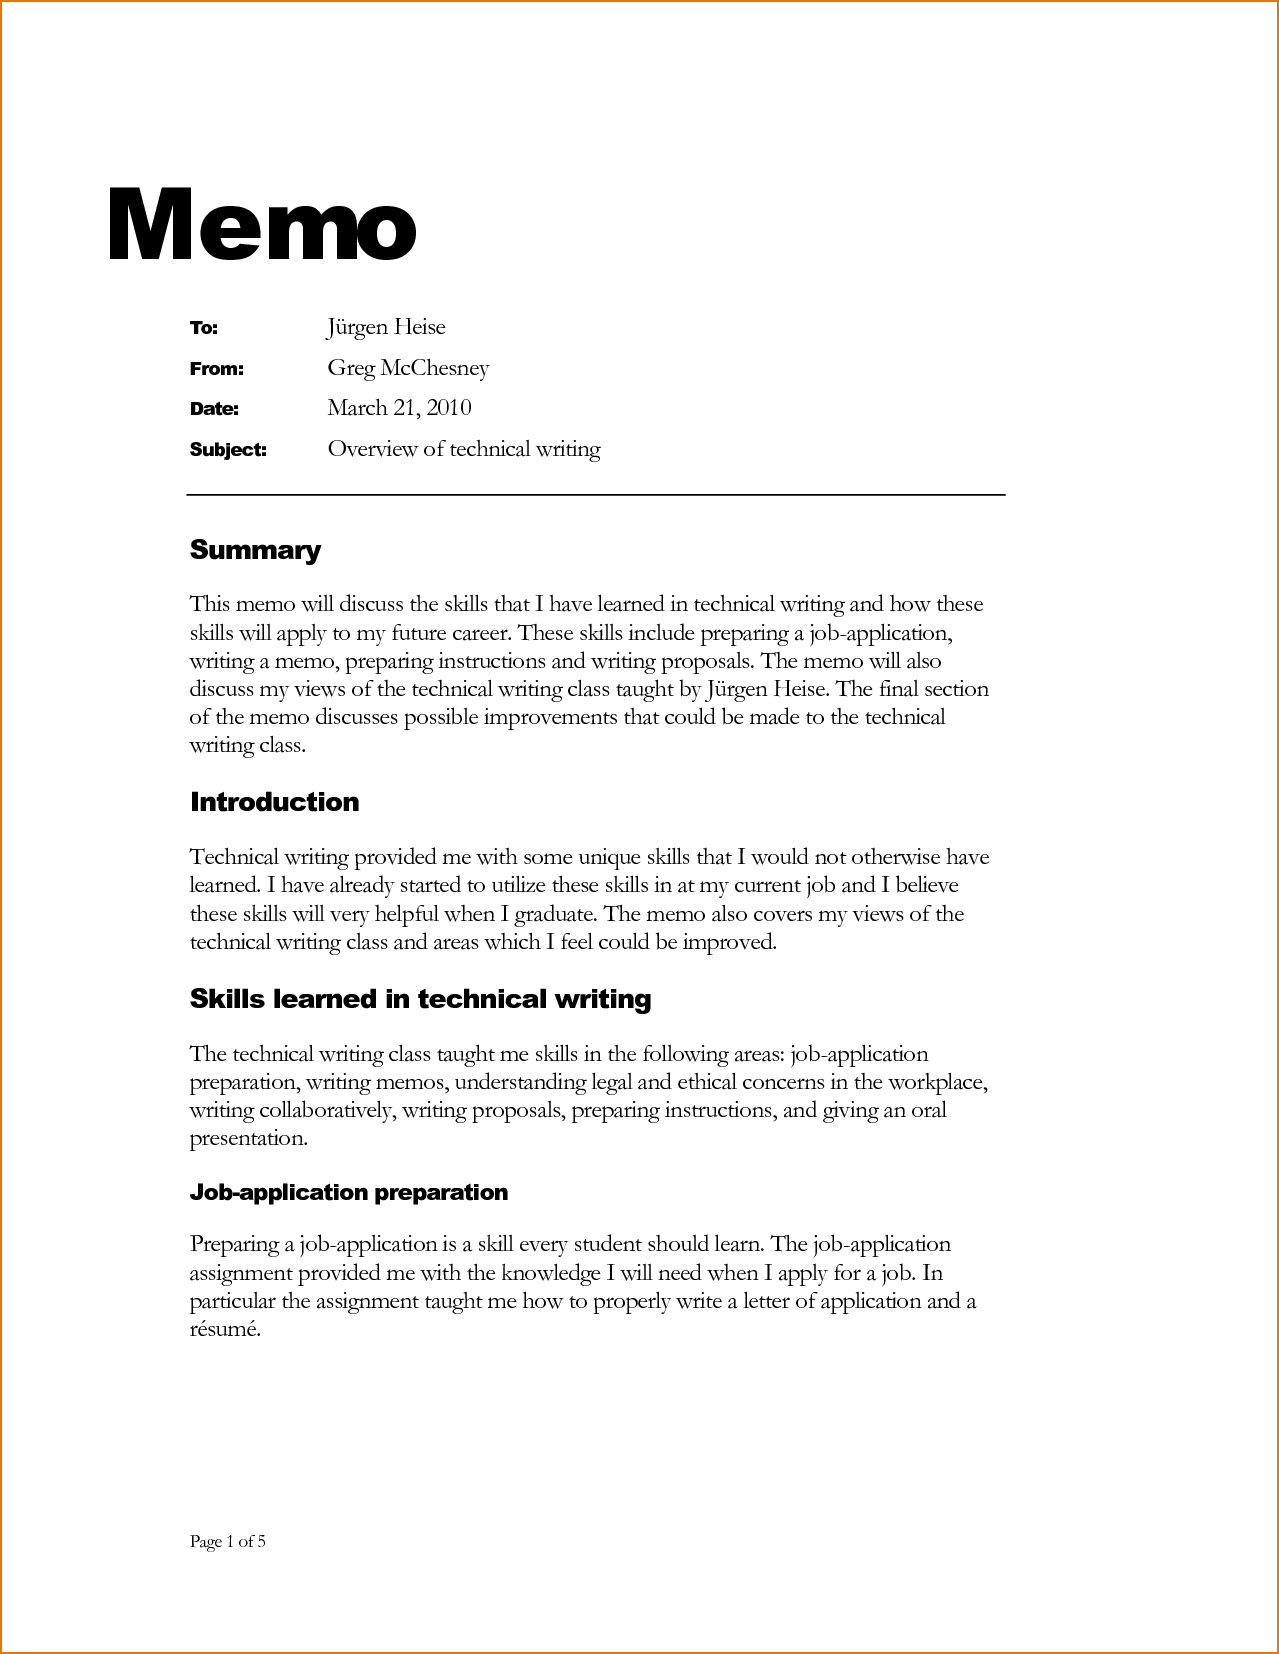 How to Write a Memo to One's Boss